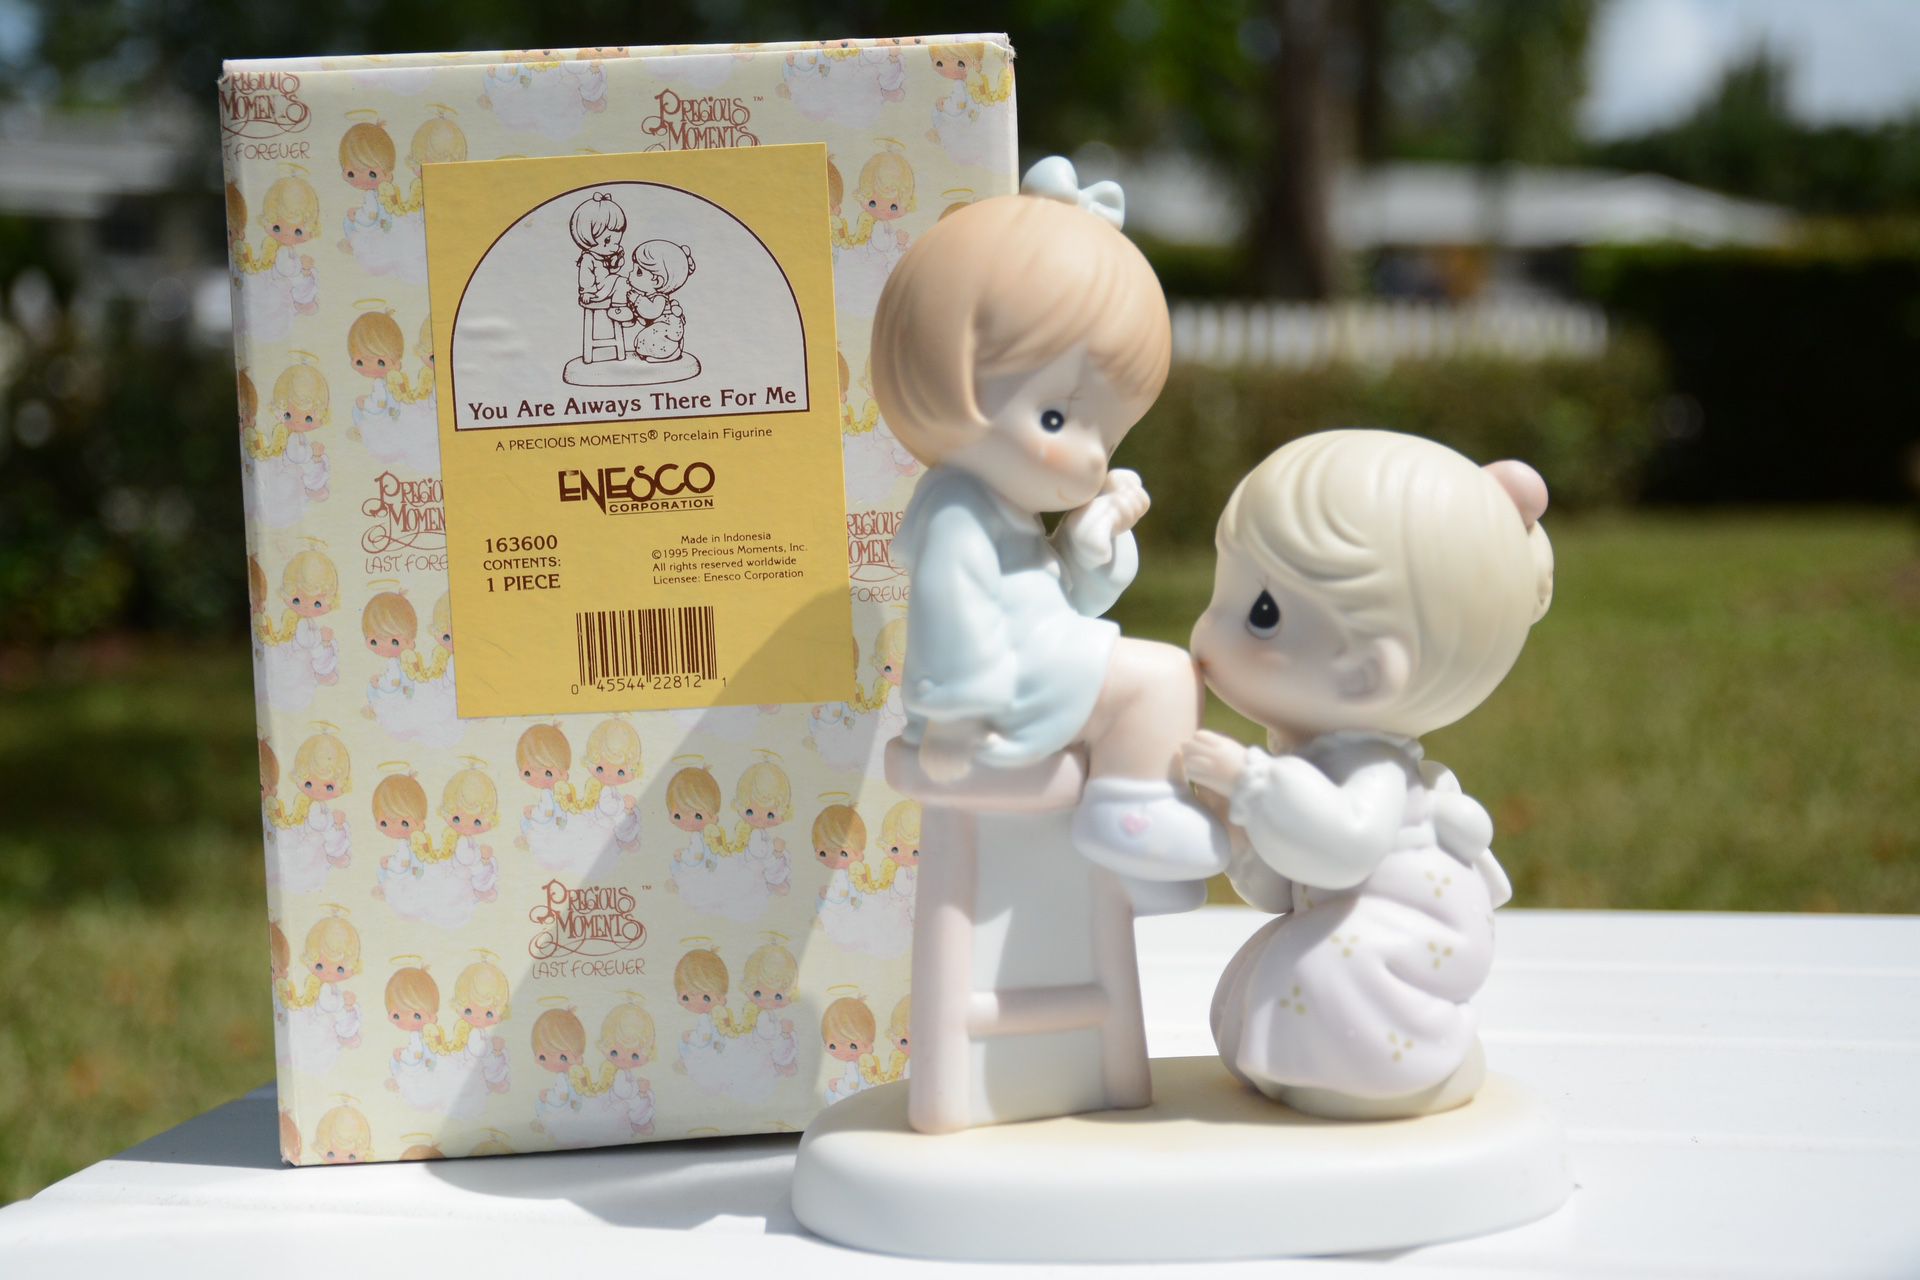 Precious Moment “You Are Always There For Me” Figurine